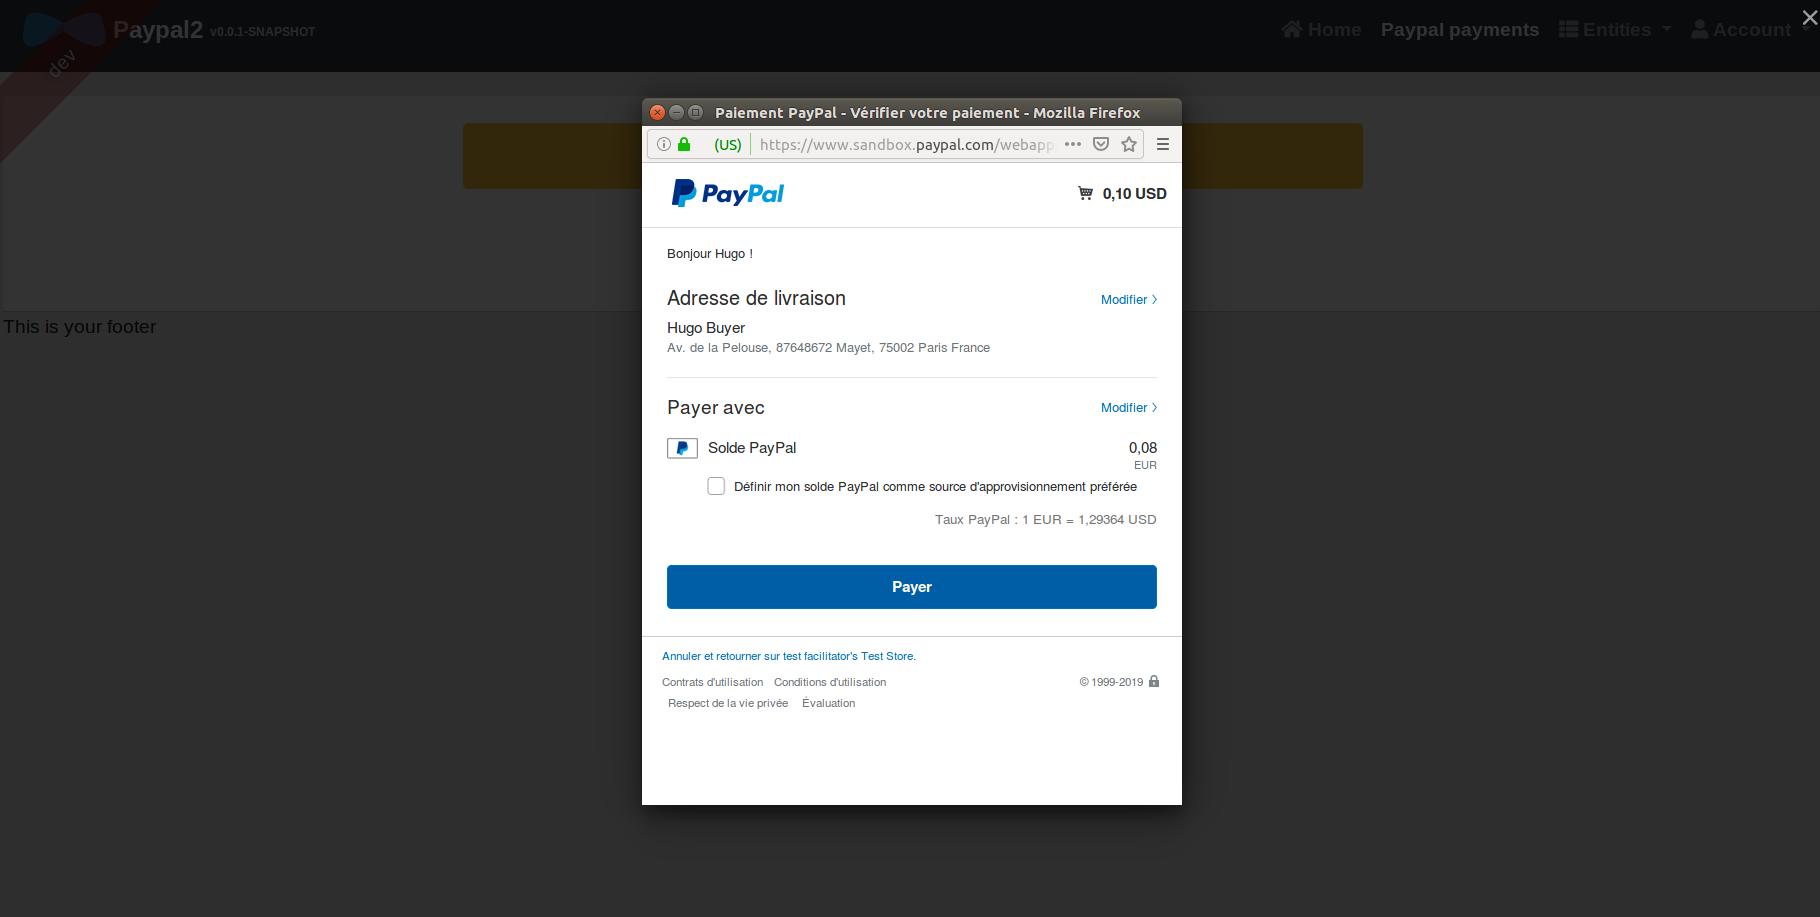 Paypal popup